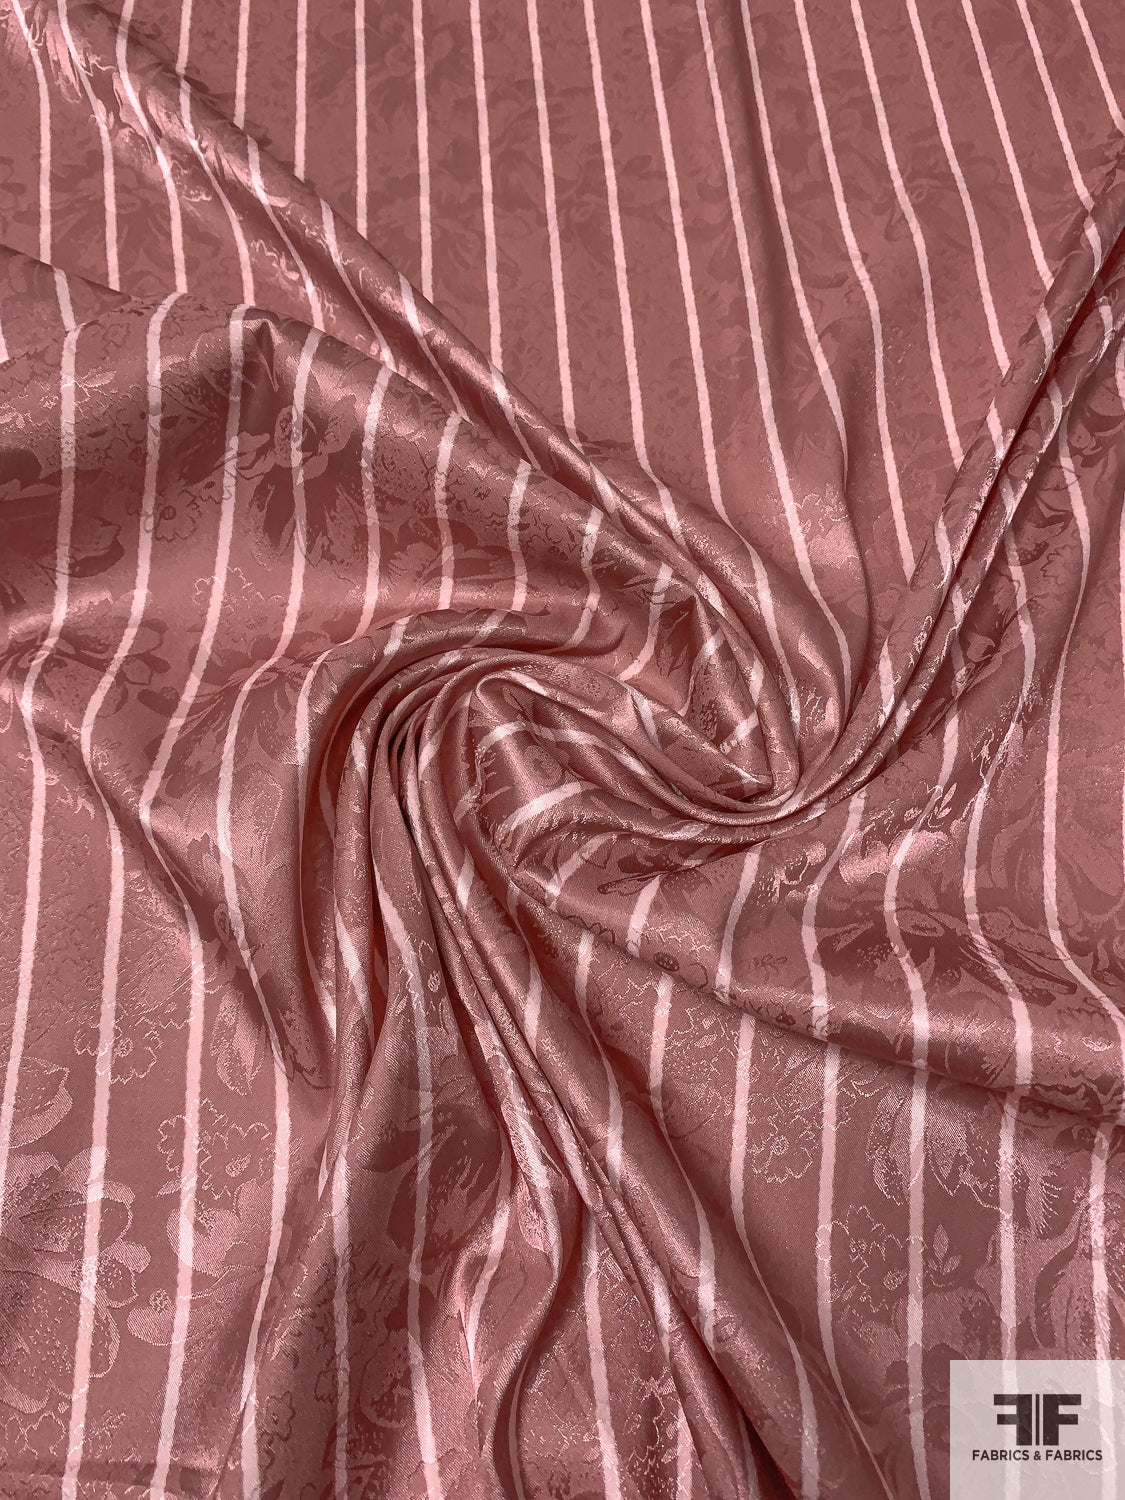 Vertical Striped Printed Floral Polyester Jacquard - Dusty Rose / Soft Pink